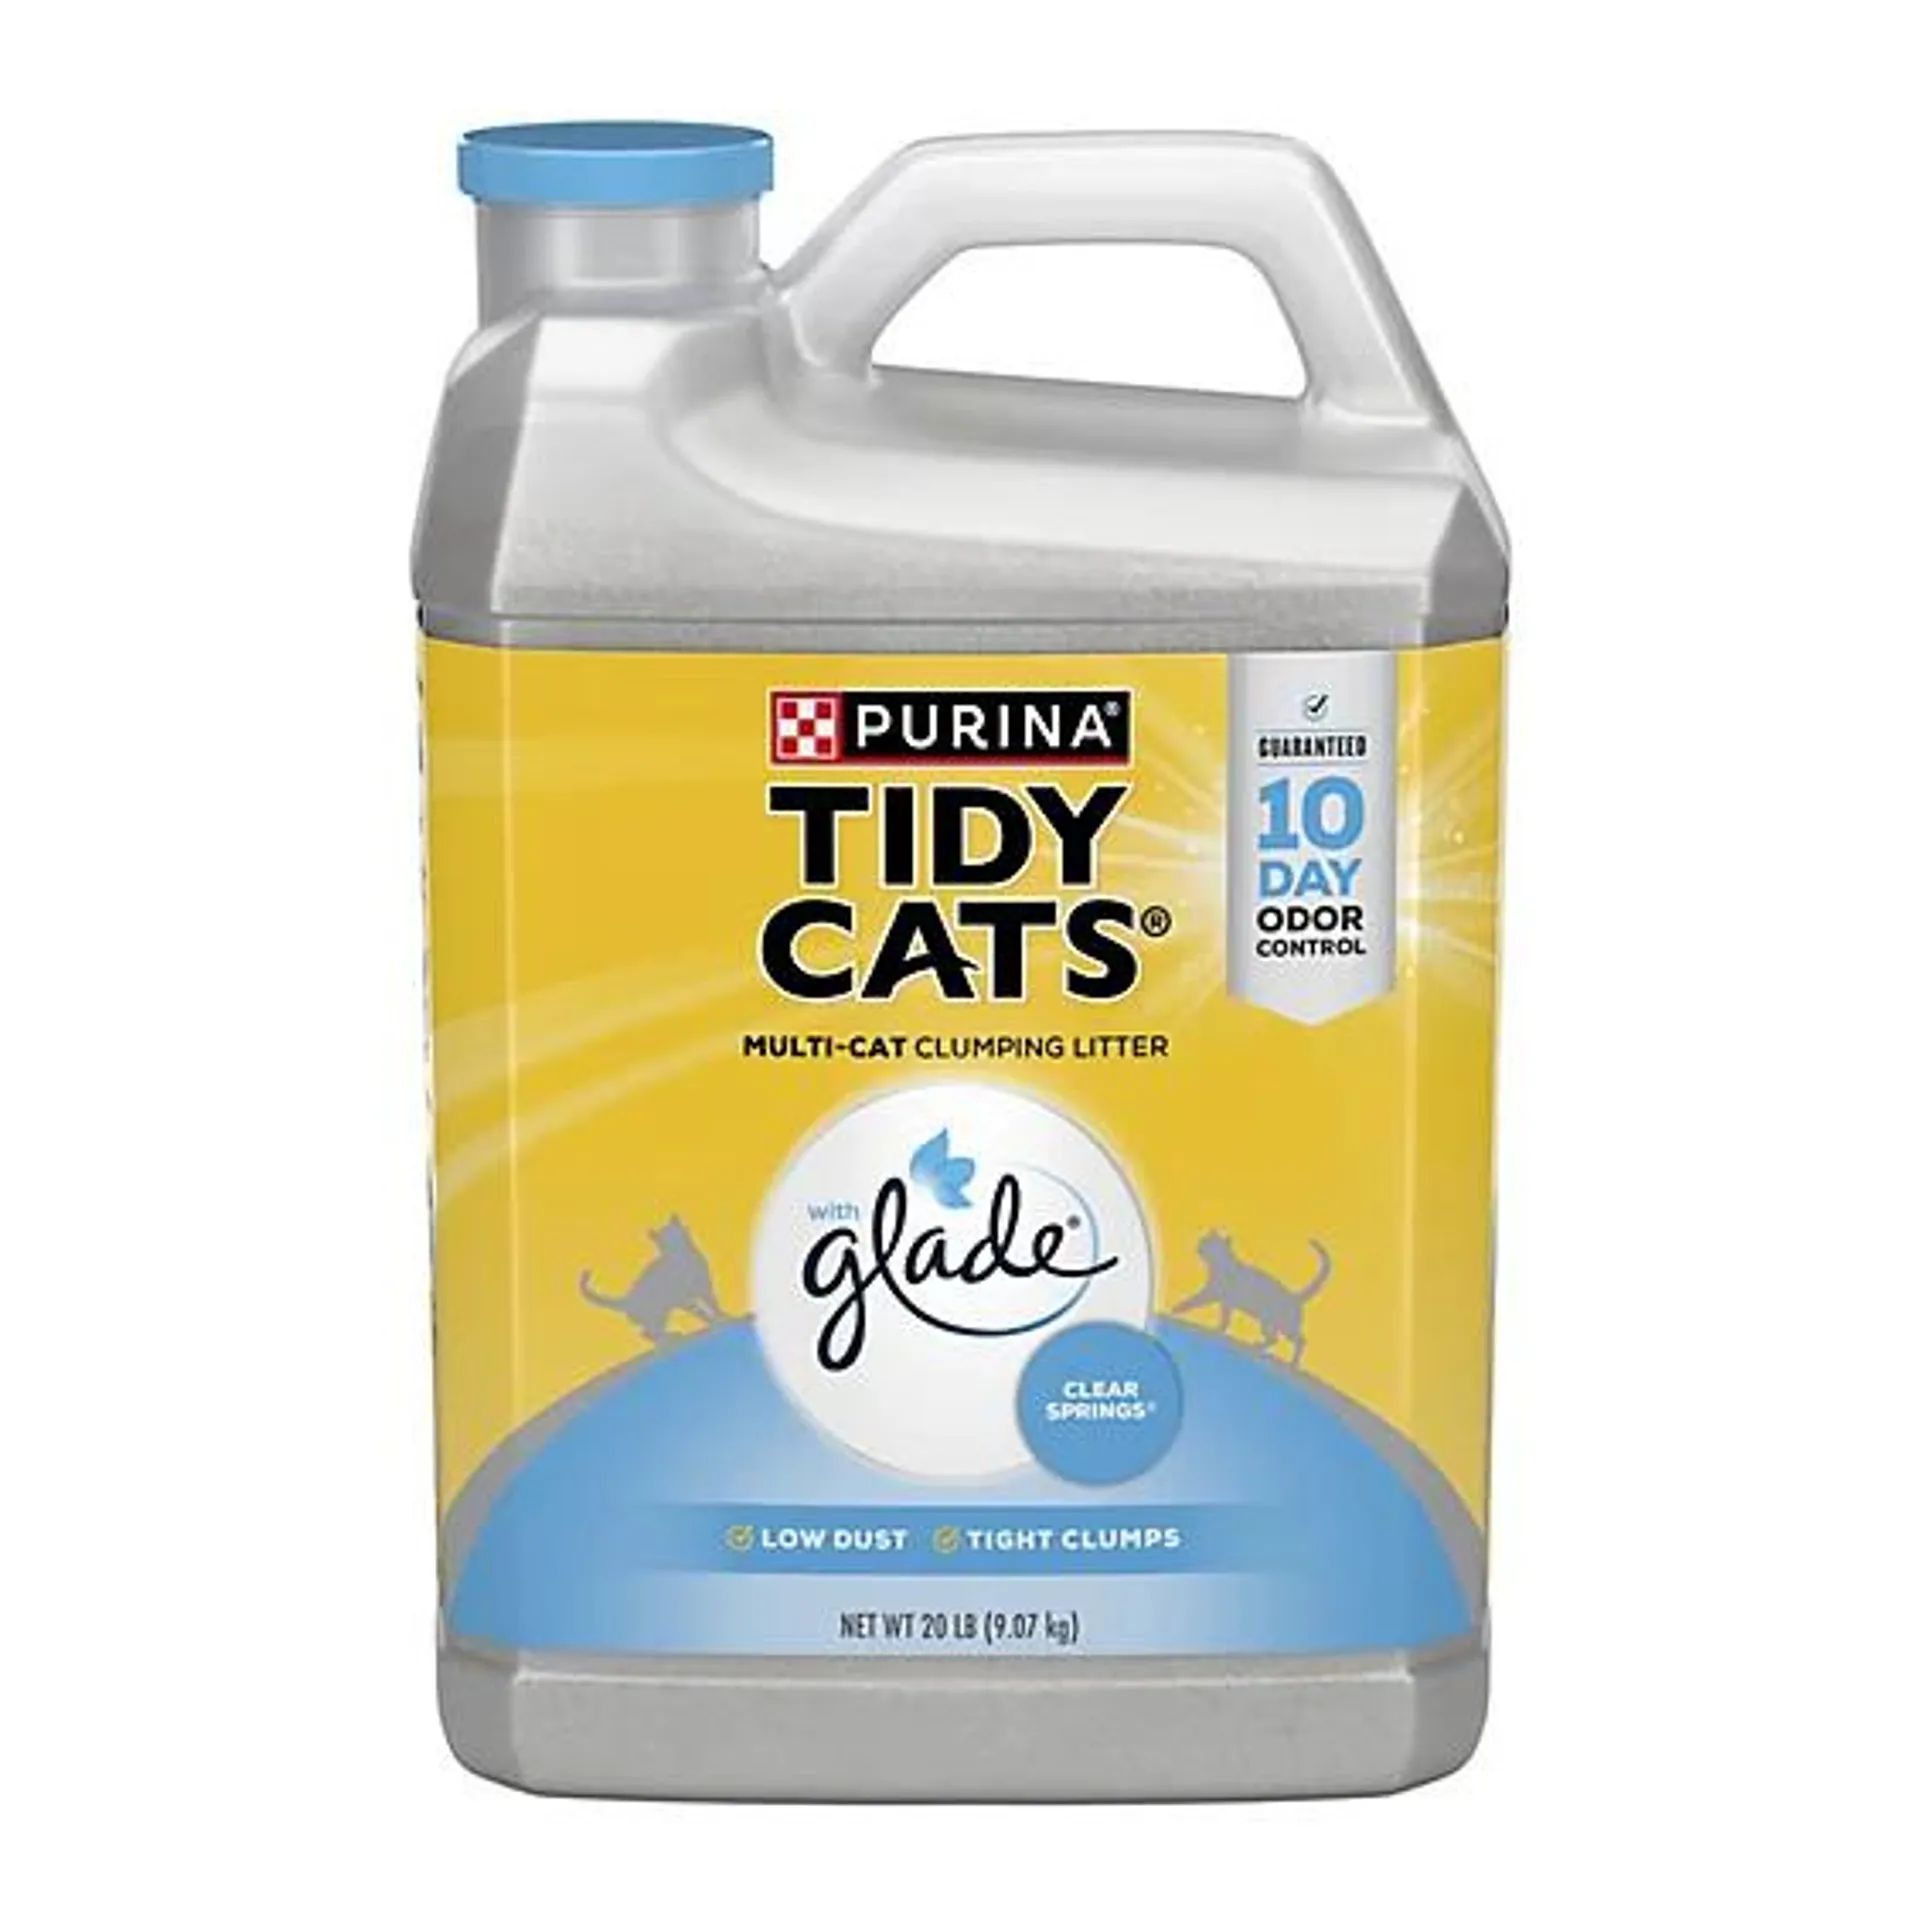 Purina Tidy Cats Cat Litter Clumping For Multiple Cats With Glade Clear Springs Jug - 20 Lb